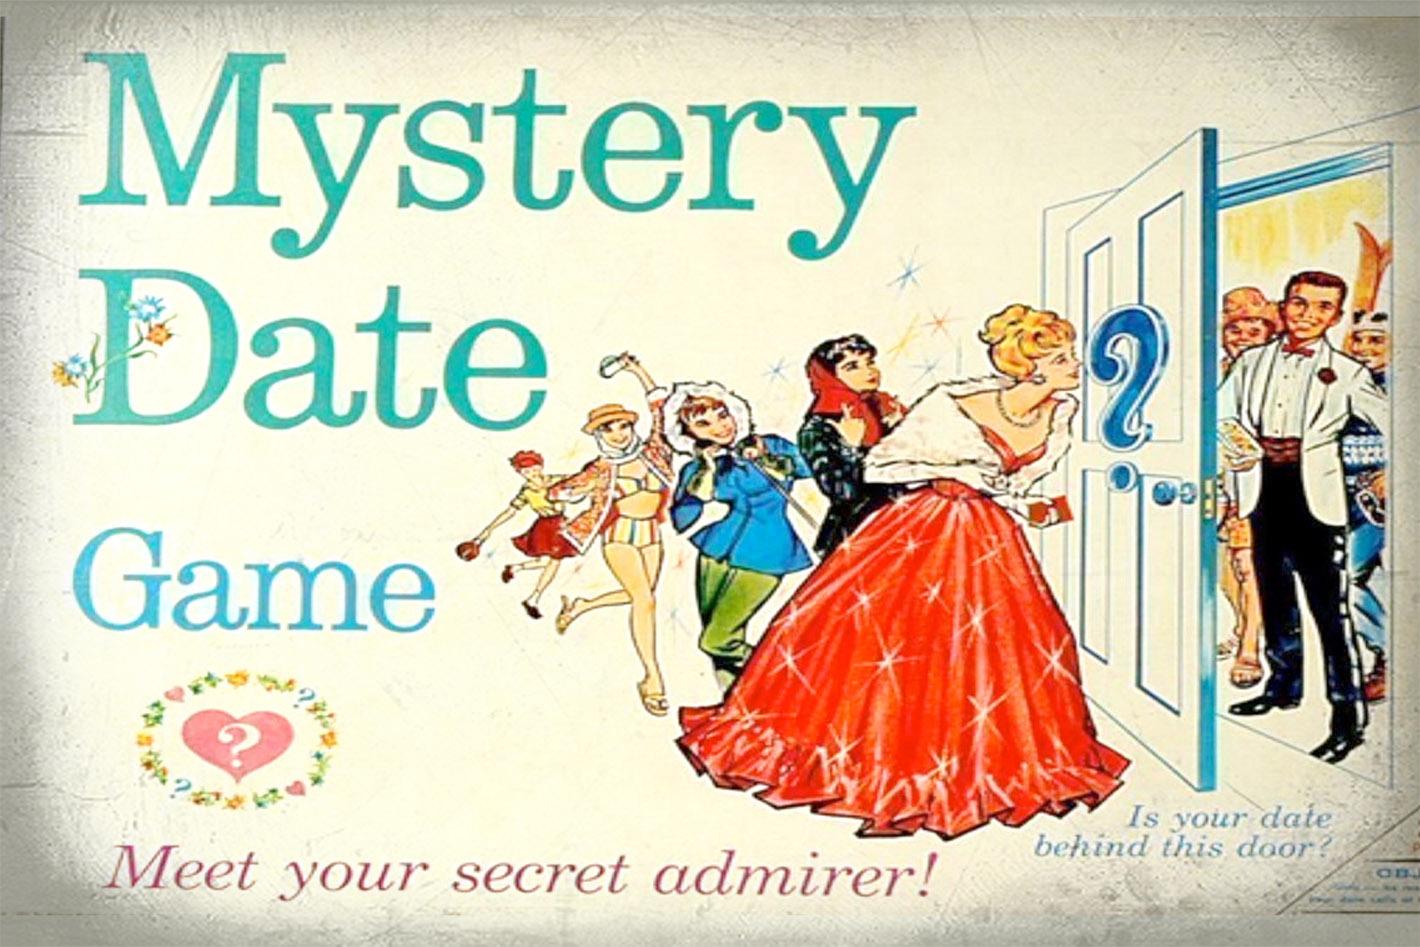 Mystery Date Game 1960s